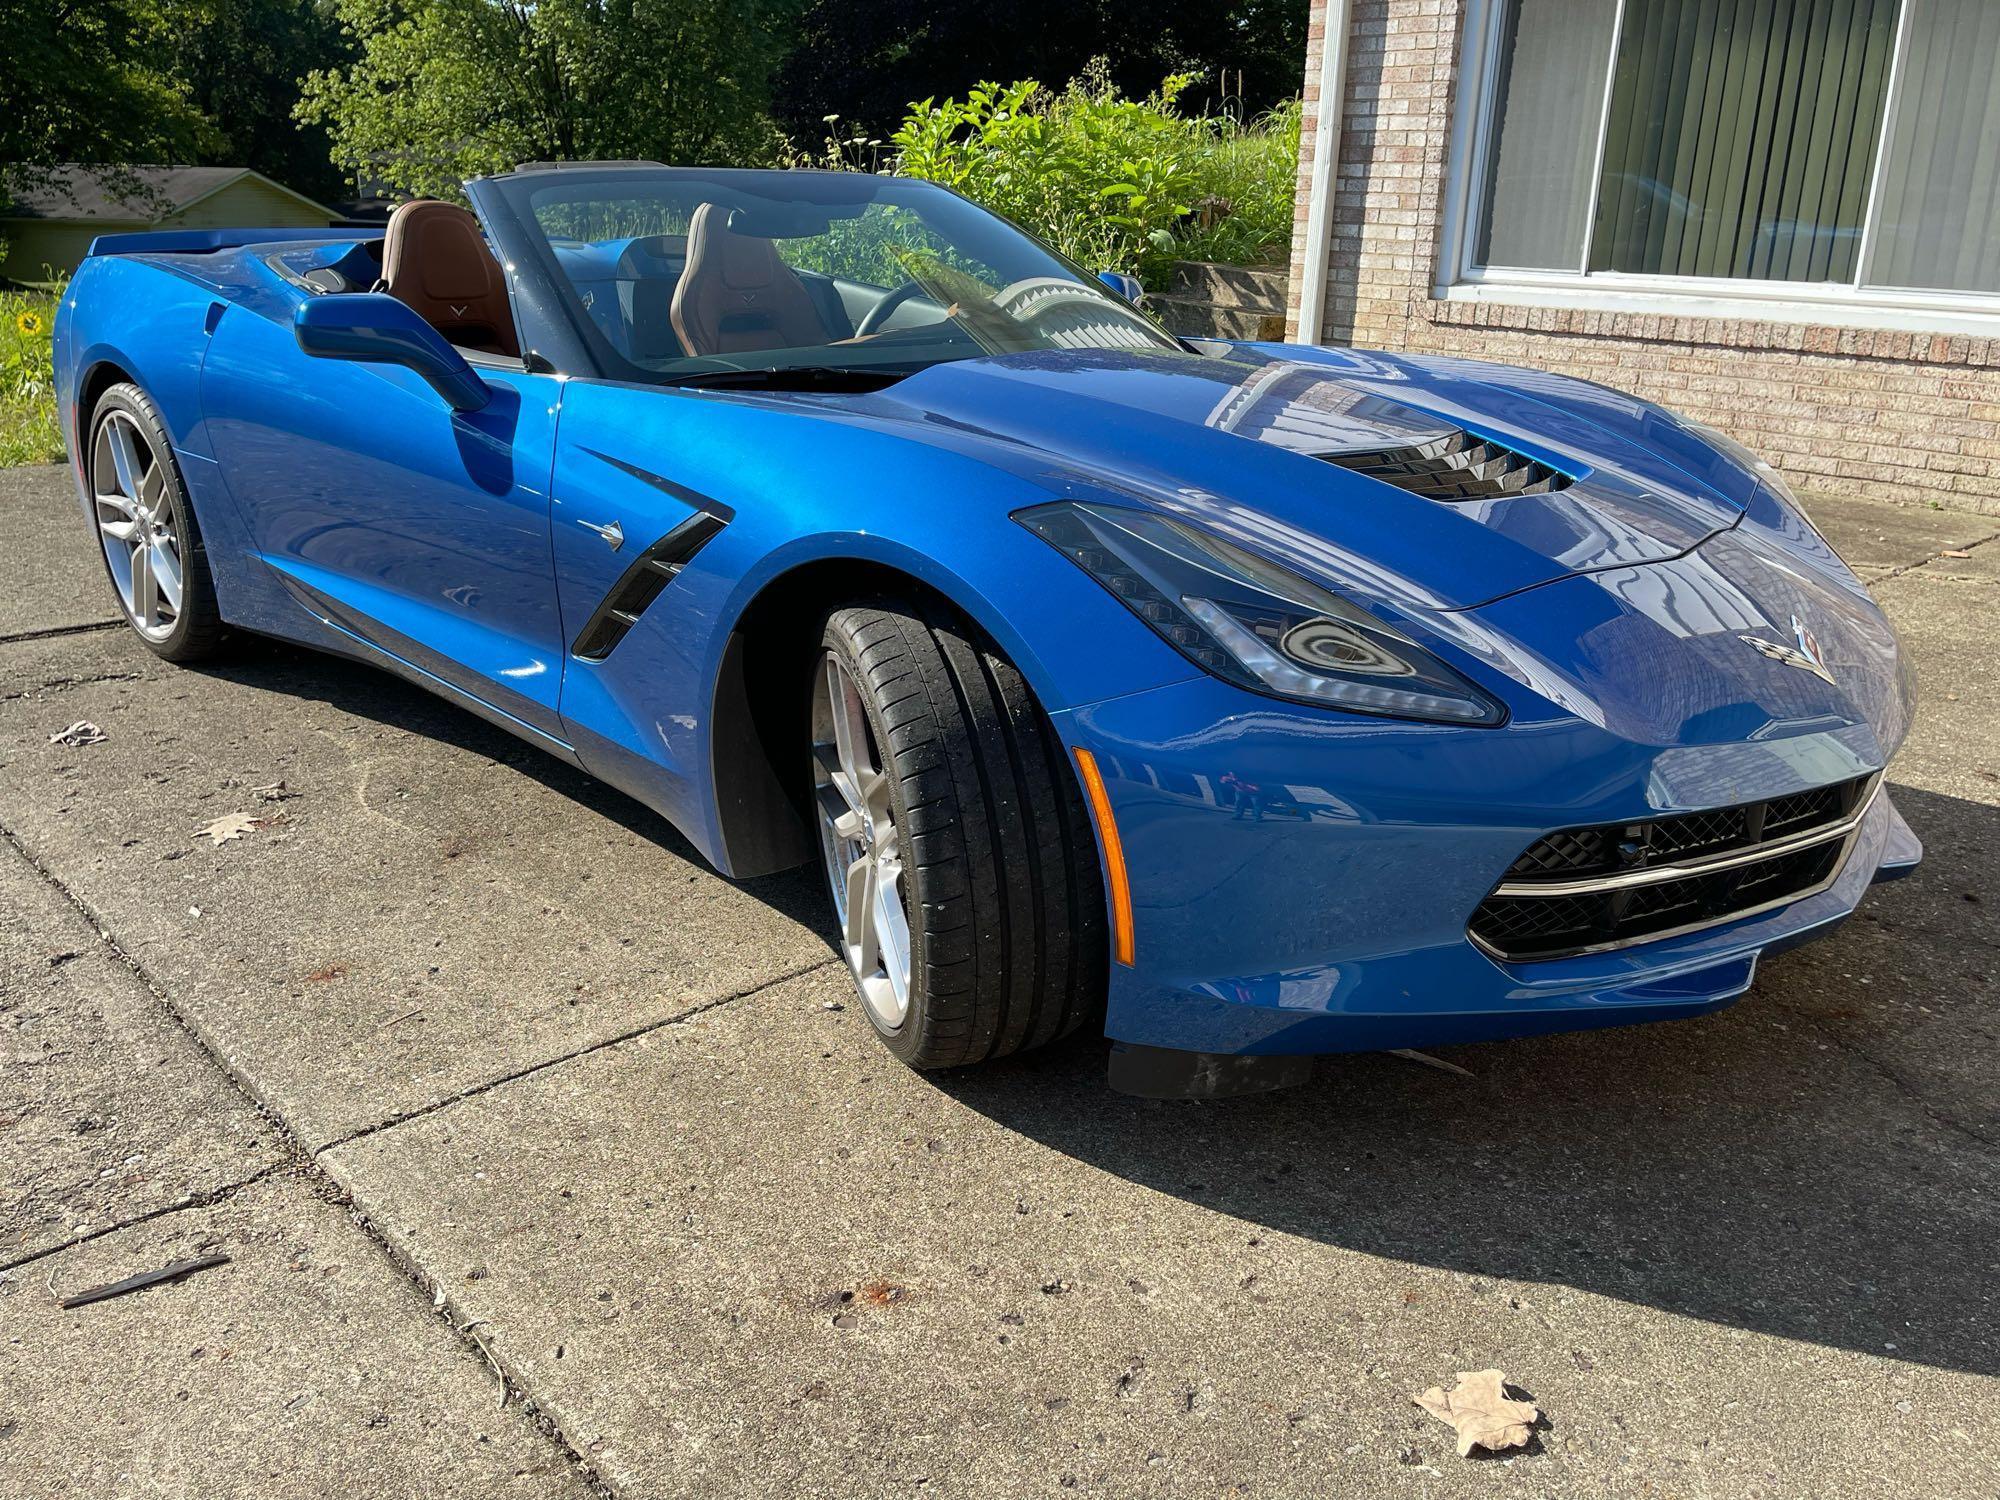 2016 Chevrolet Corvette Stingray, 6 speed stick shift, one owner 4,800 actual miles